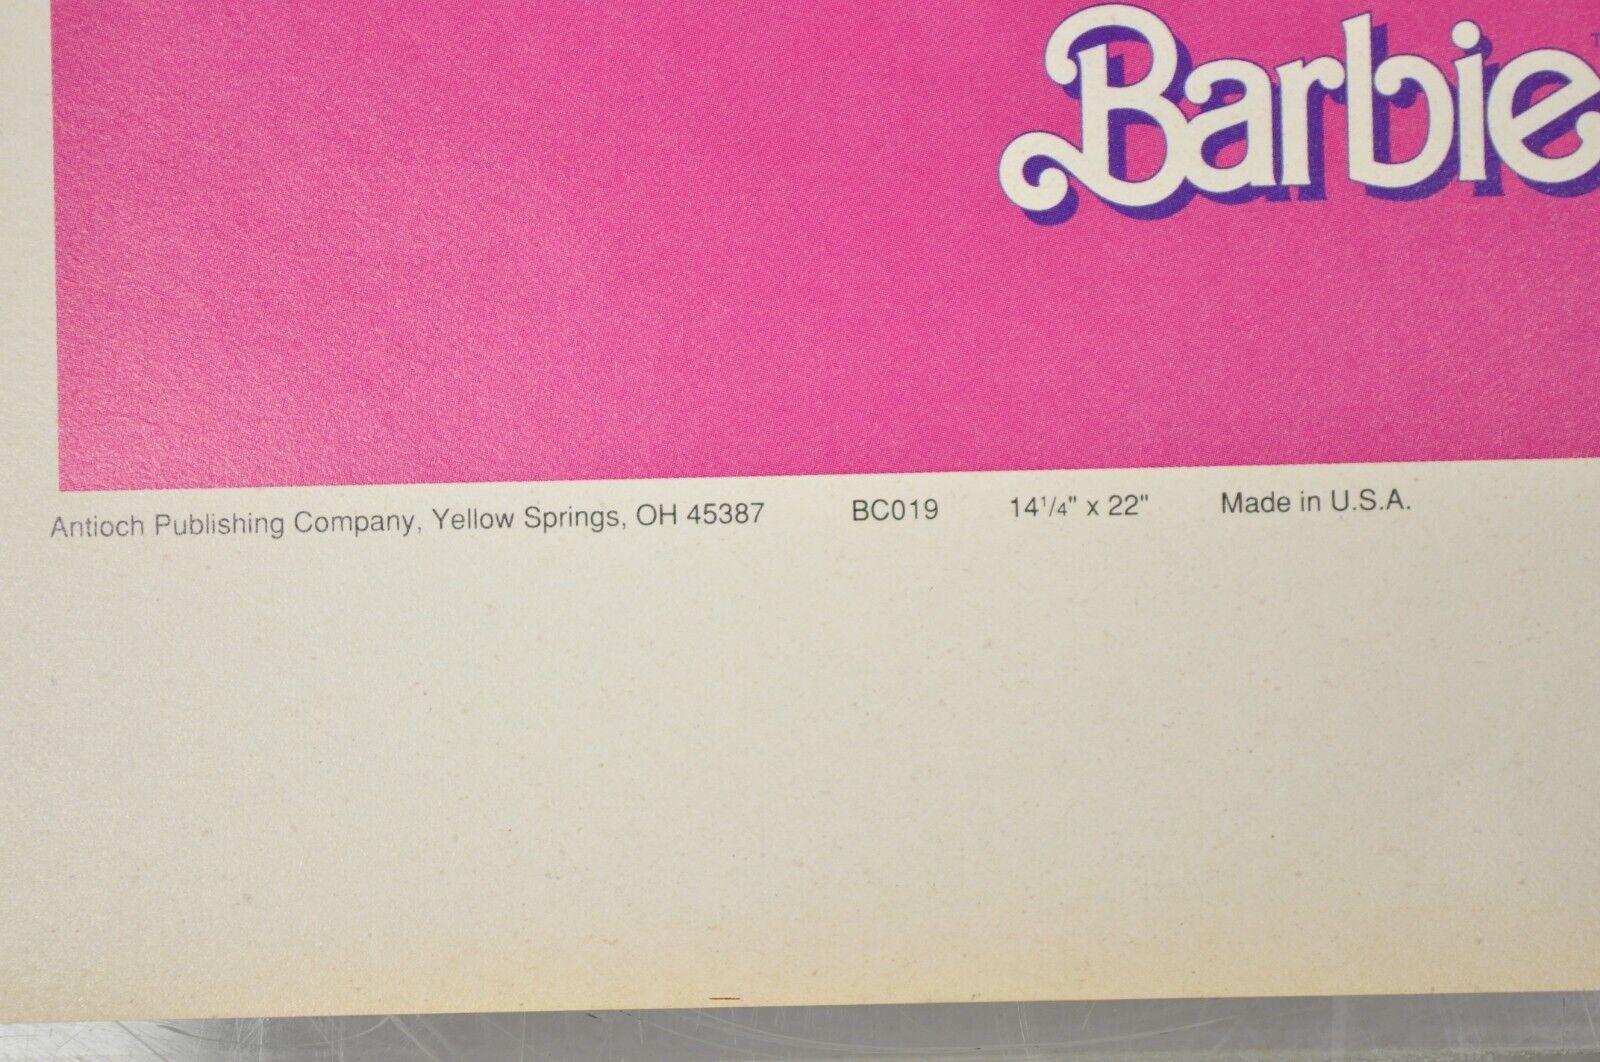 Vintage 1989 Barbie Mattel Original Pink Paper Book Covers NOS - Many Available For Sale 3